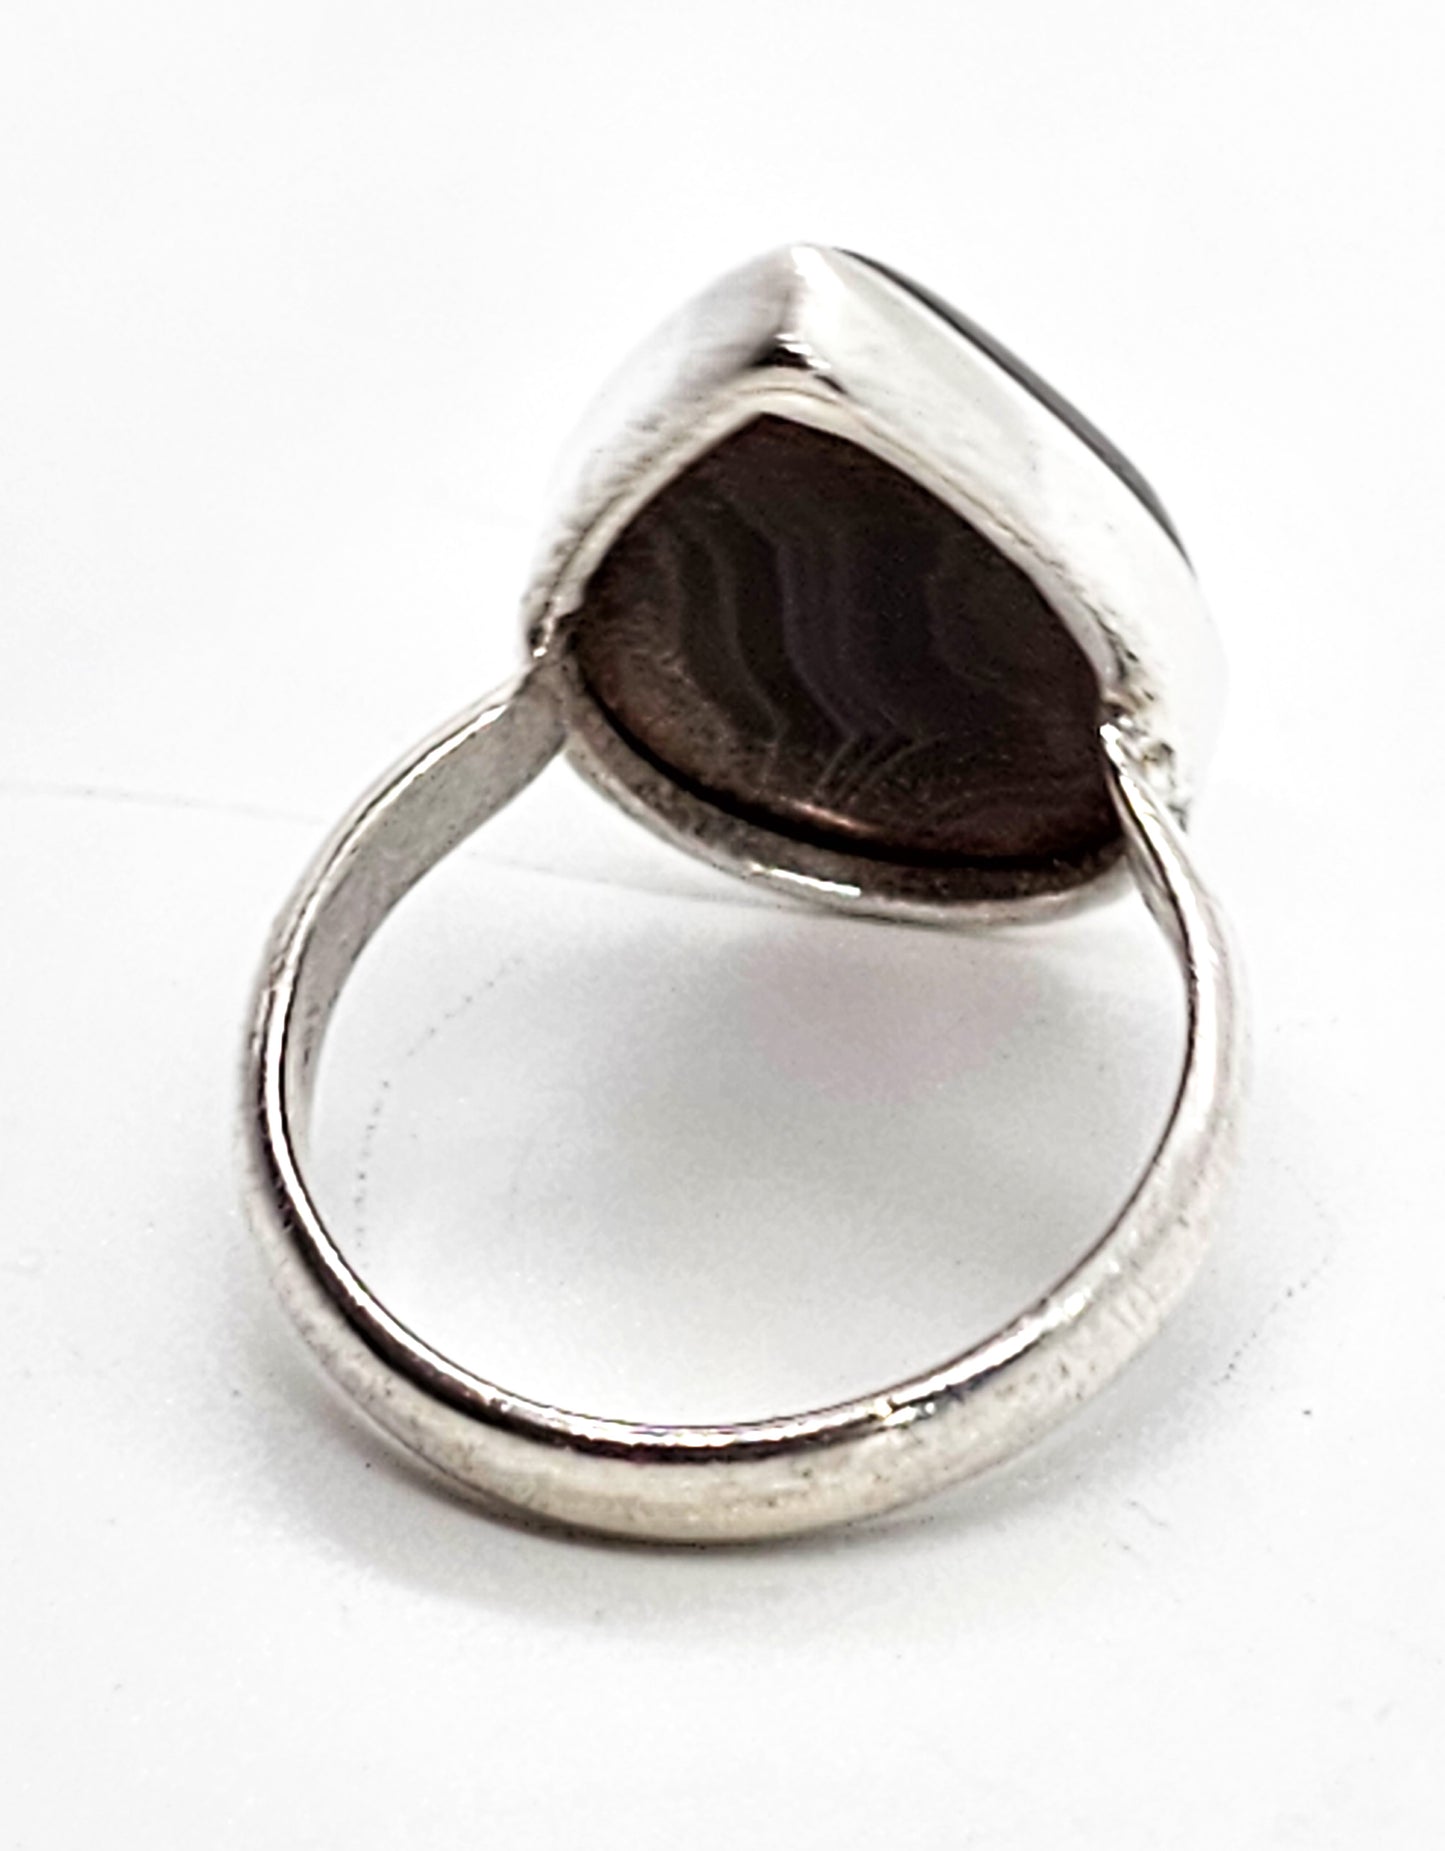 Botswana Agate Sardonyx pear cut vintage sterling silver ring size 7 and 1/2